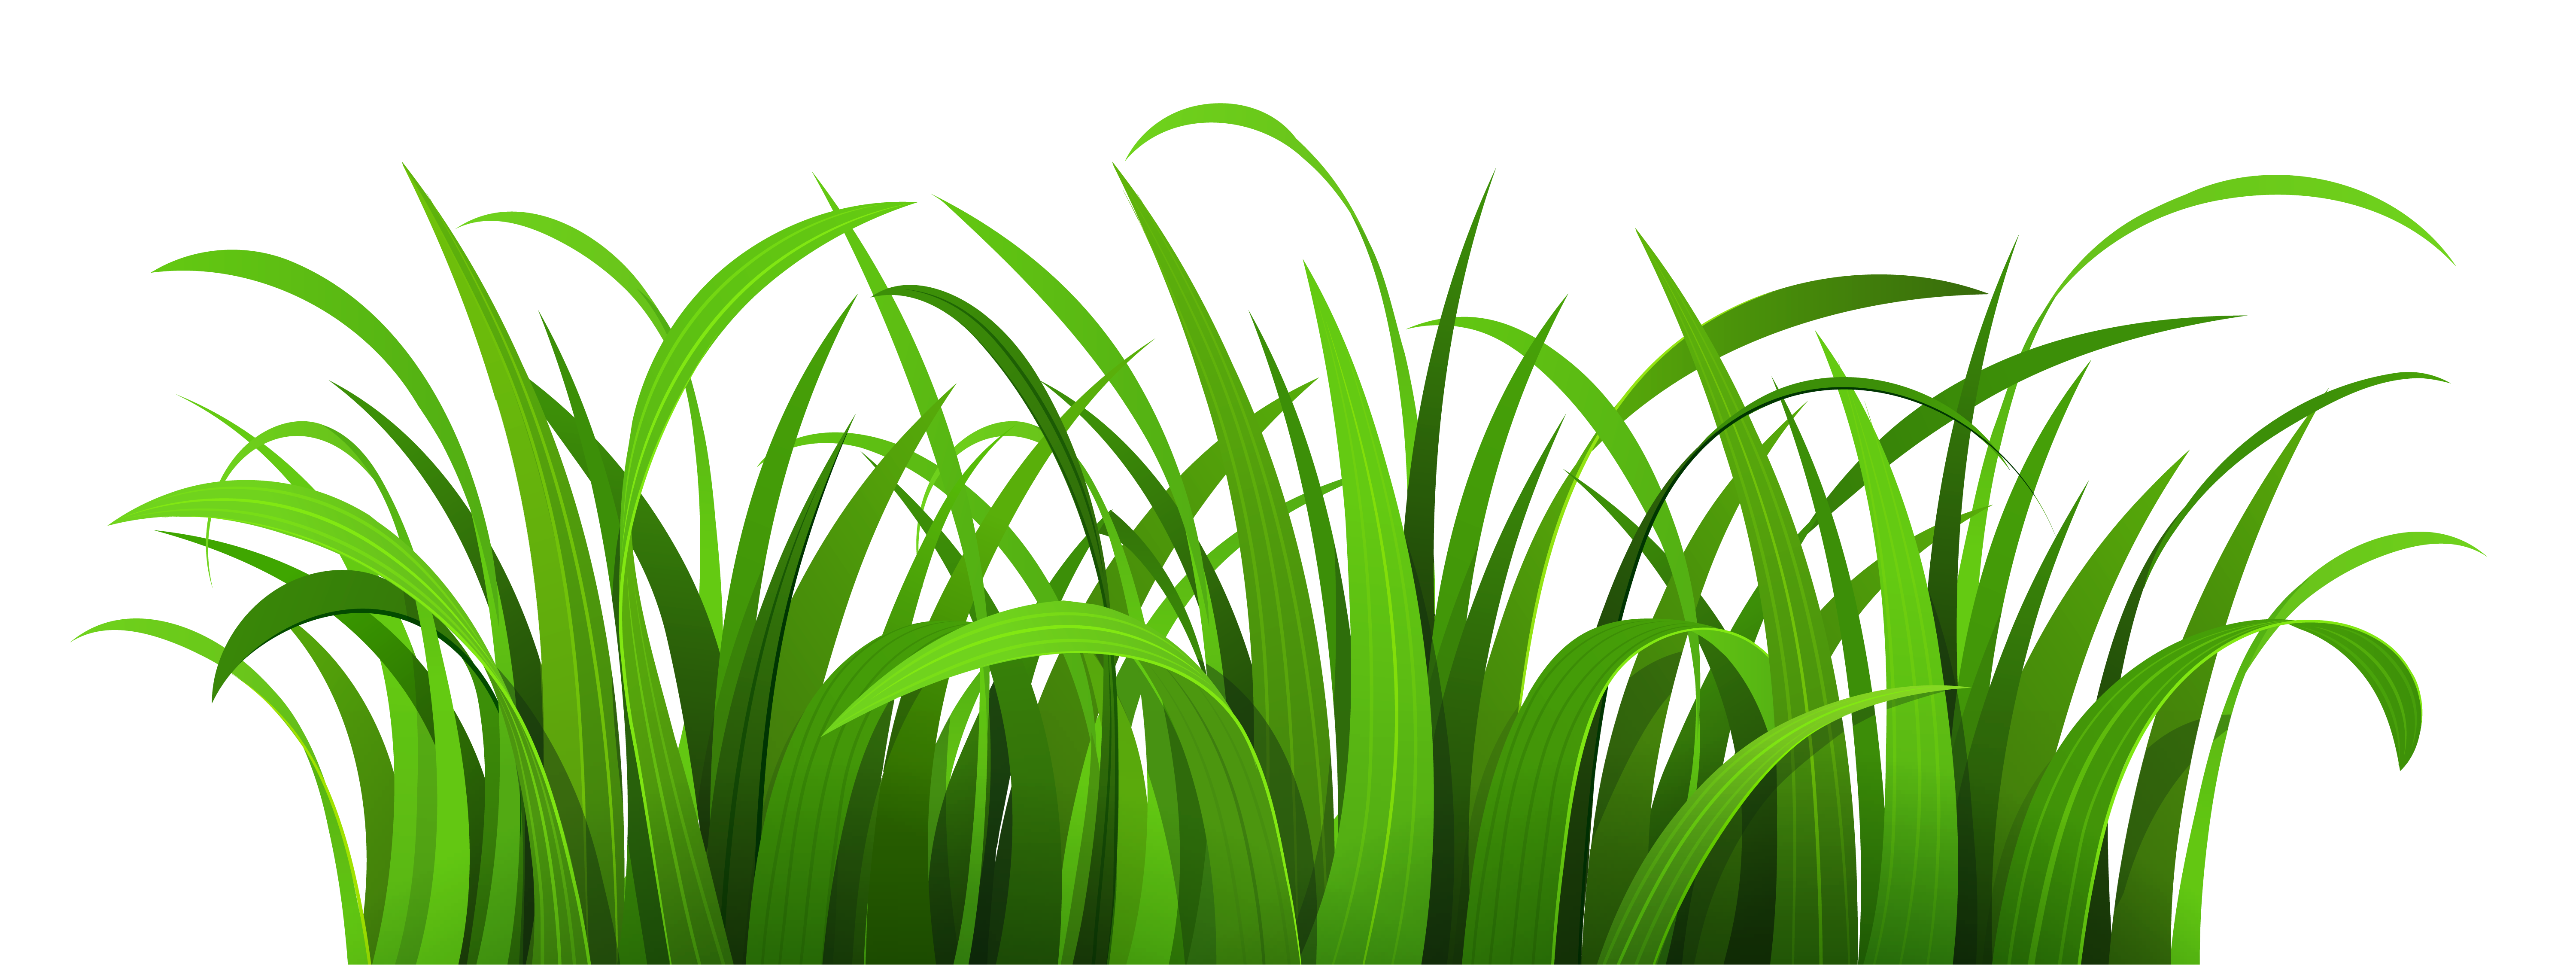 Grass Patch PNG Clipart.